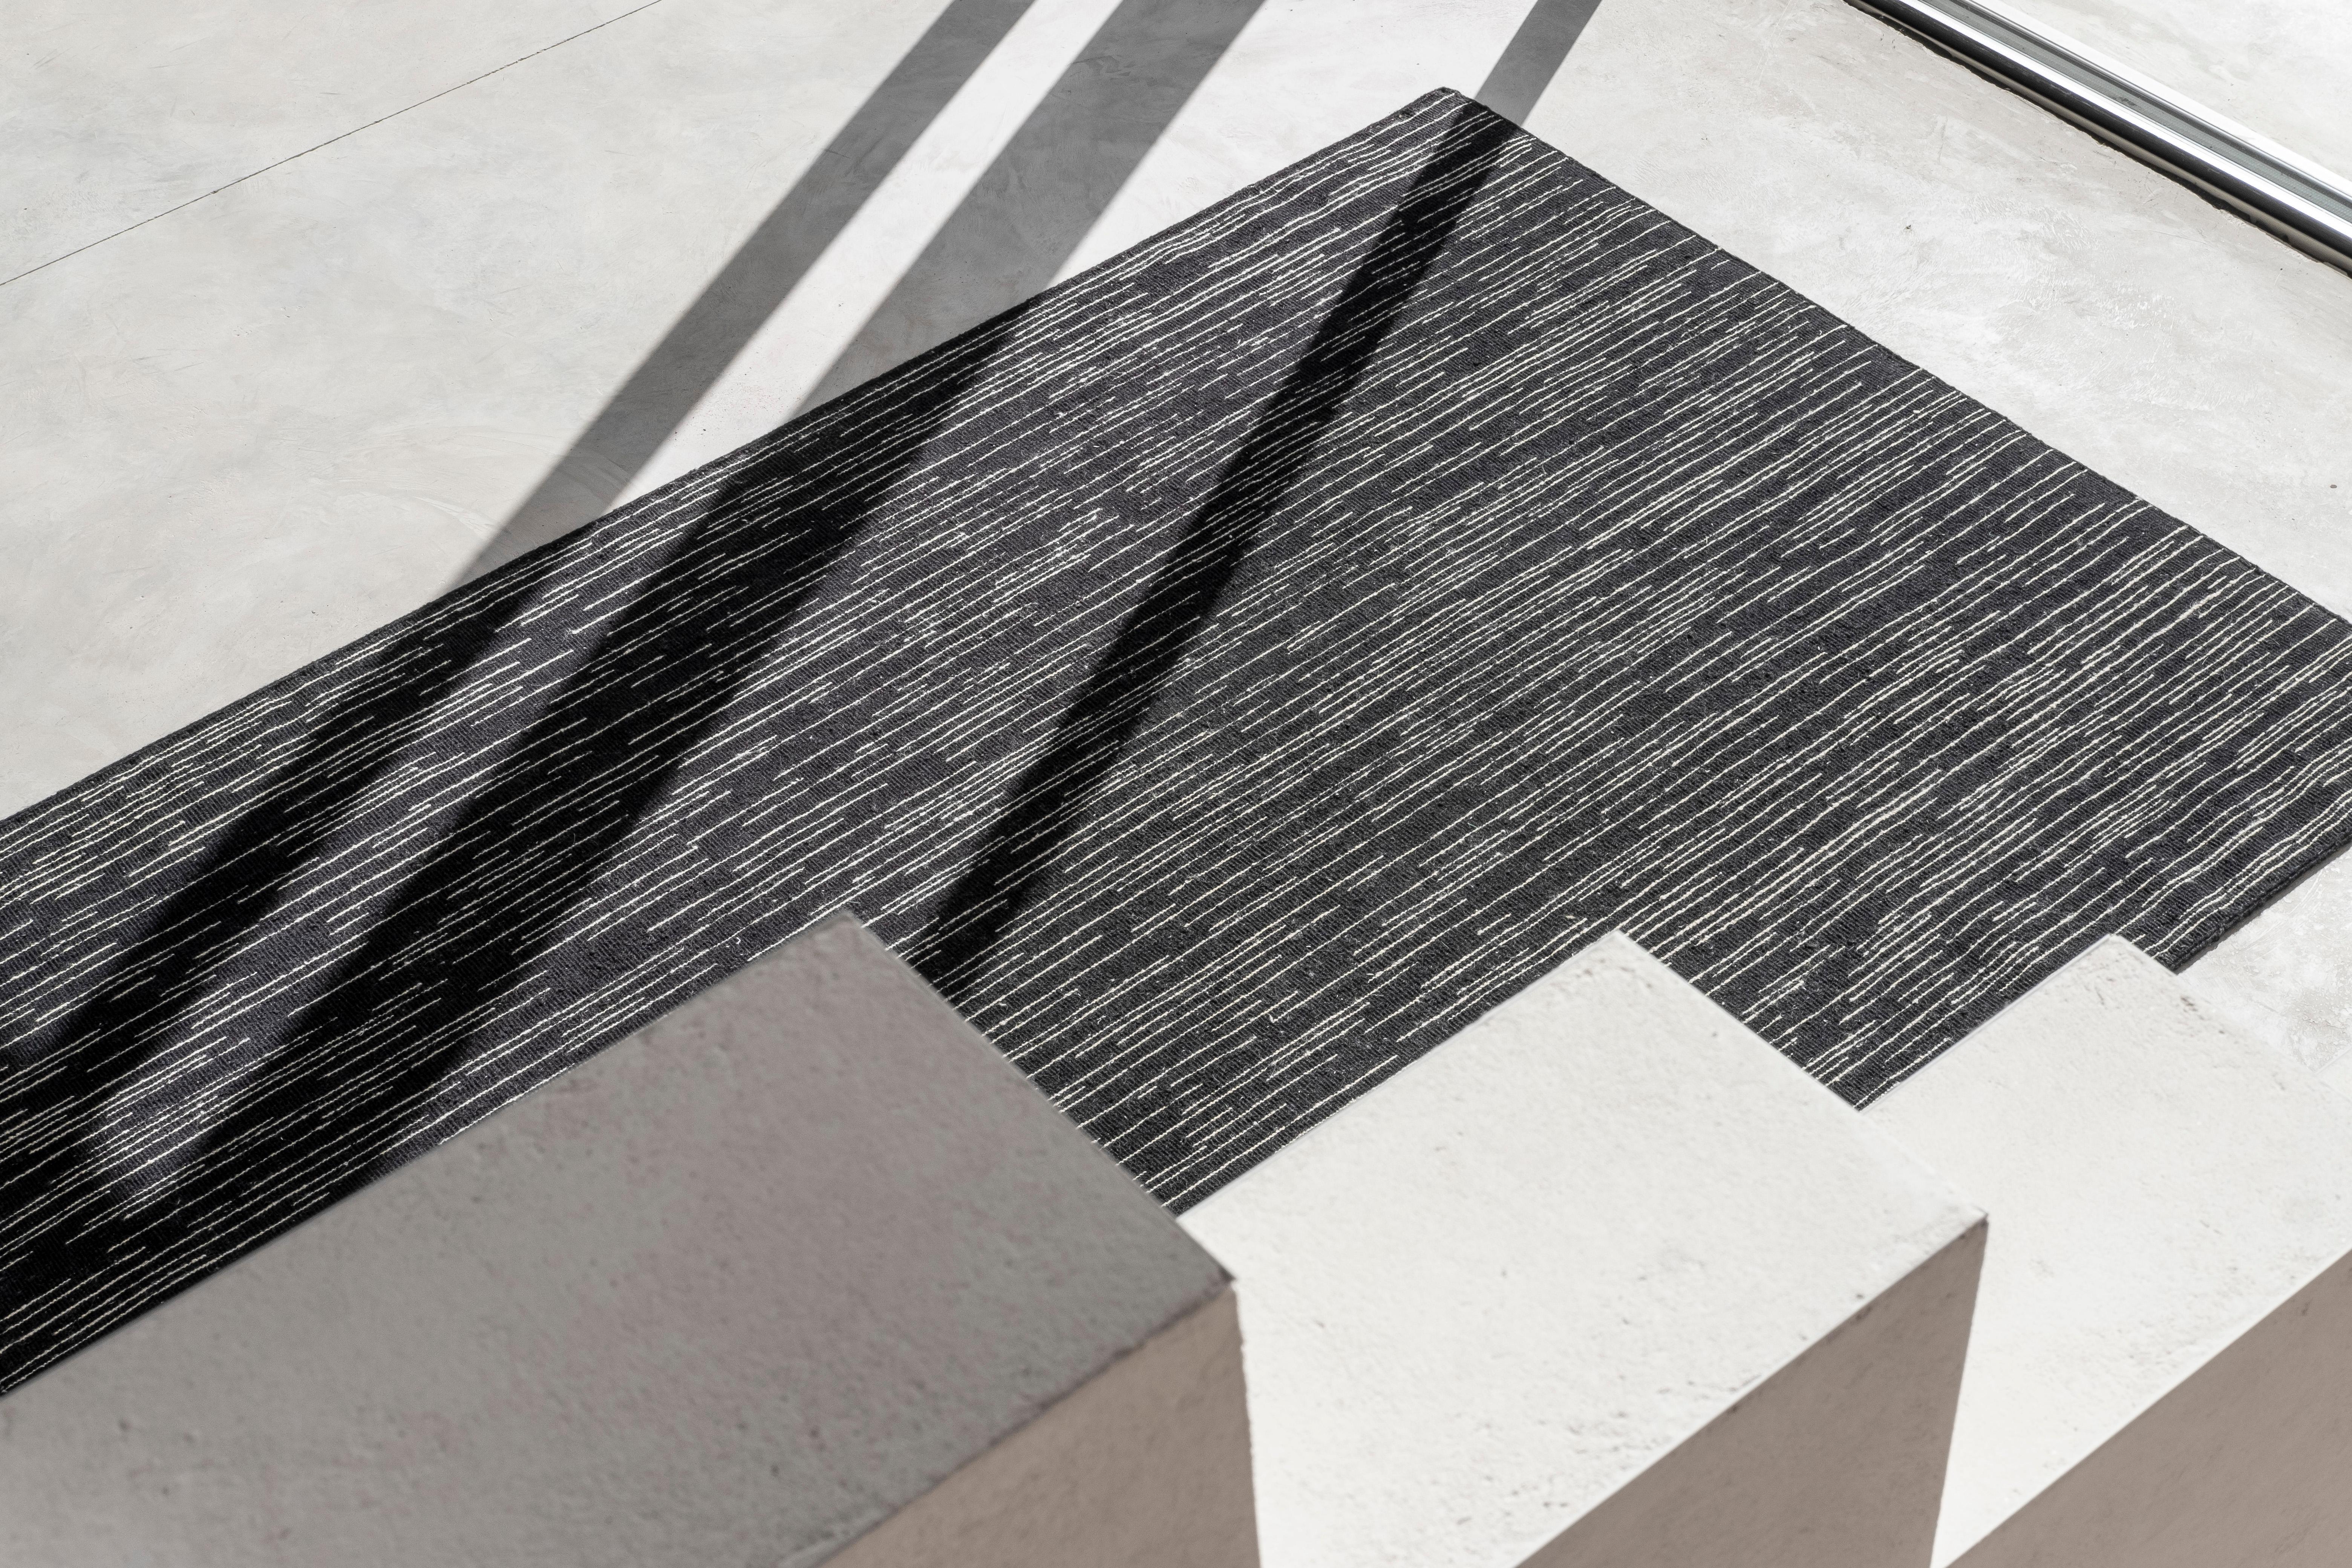 Doblecara, designed by Ronan Bouroullec, reflects his spirit of geometry through subtle linear and intermittent strokes ending in a blurred point, creating a sense of movement in the viewer's eye. 

Doblecara 2 is a reversible rug, both sides of